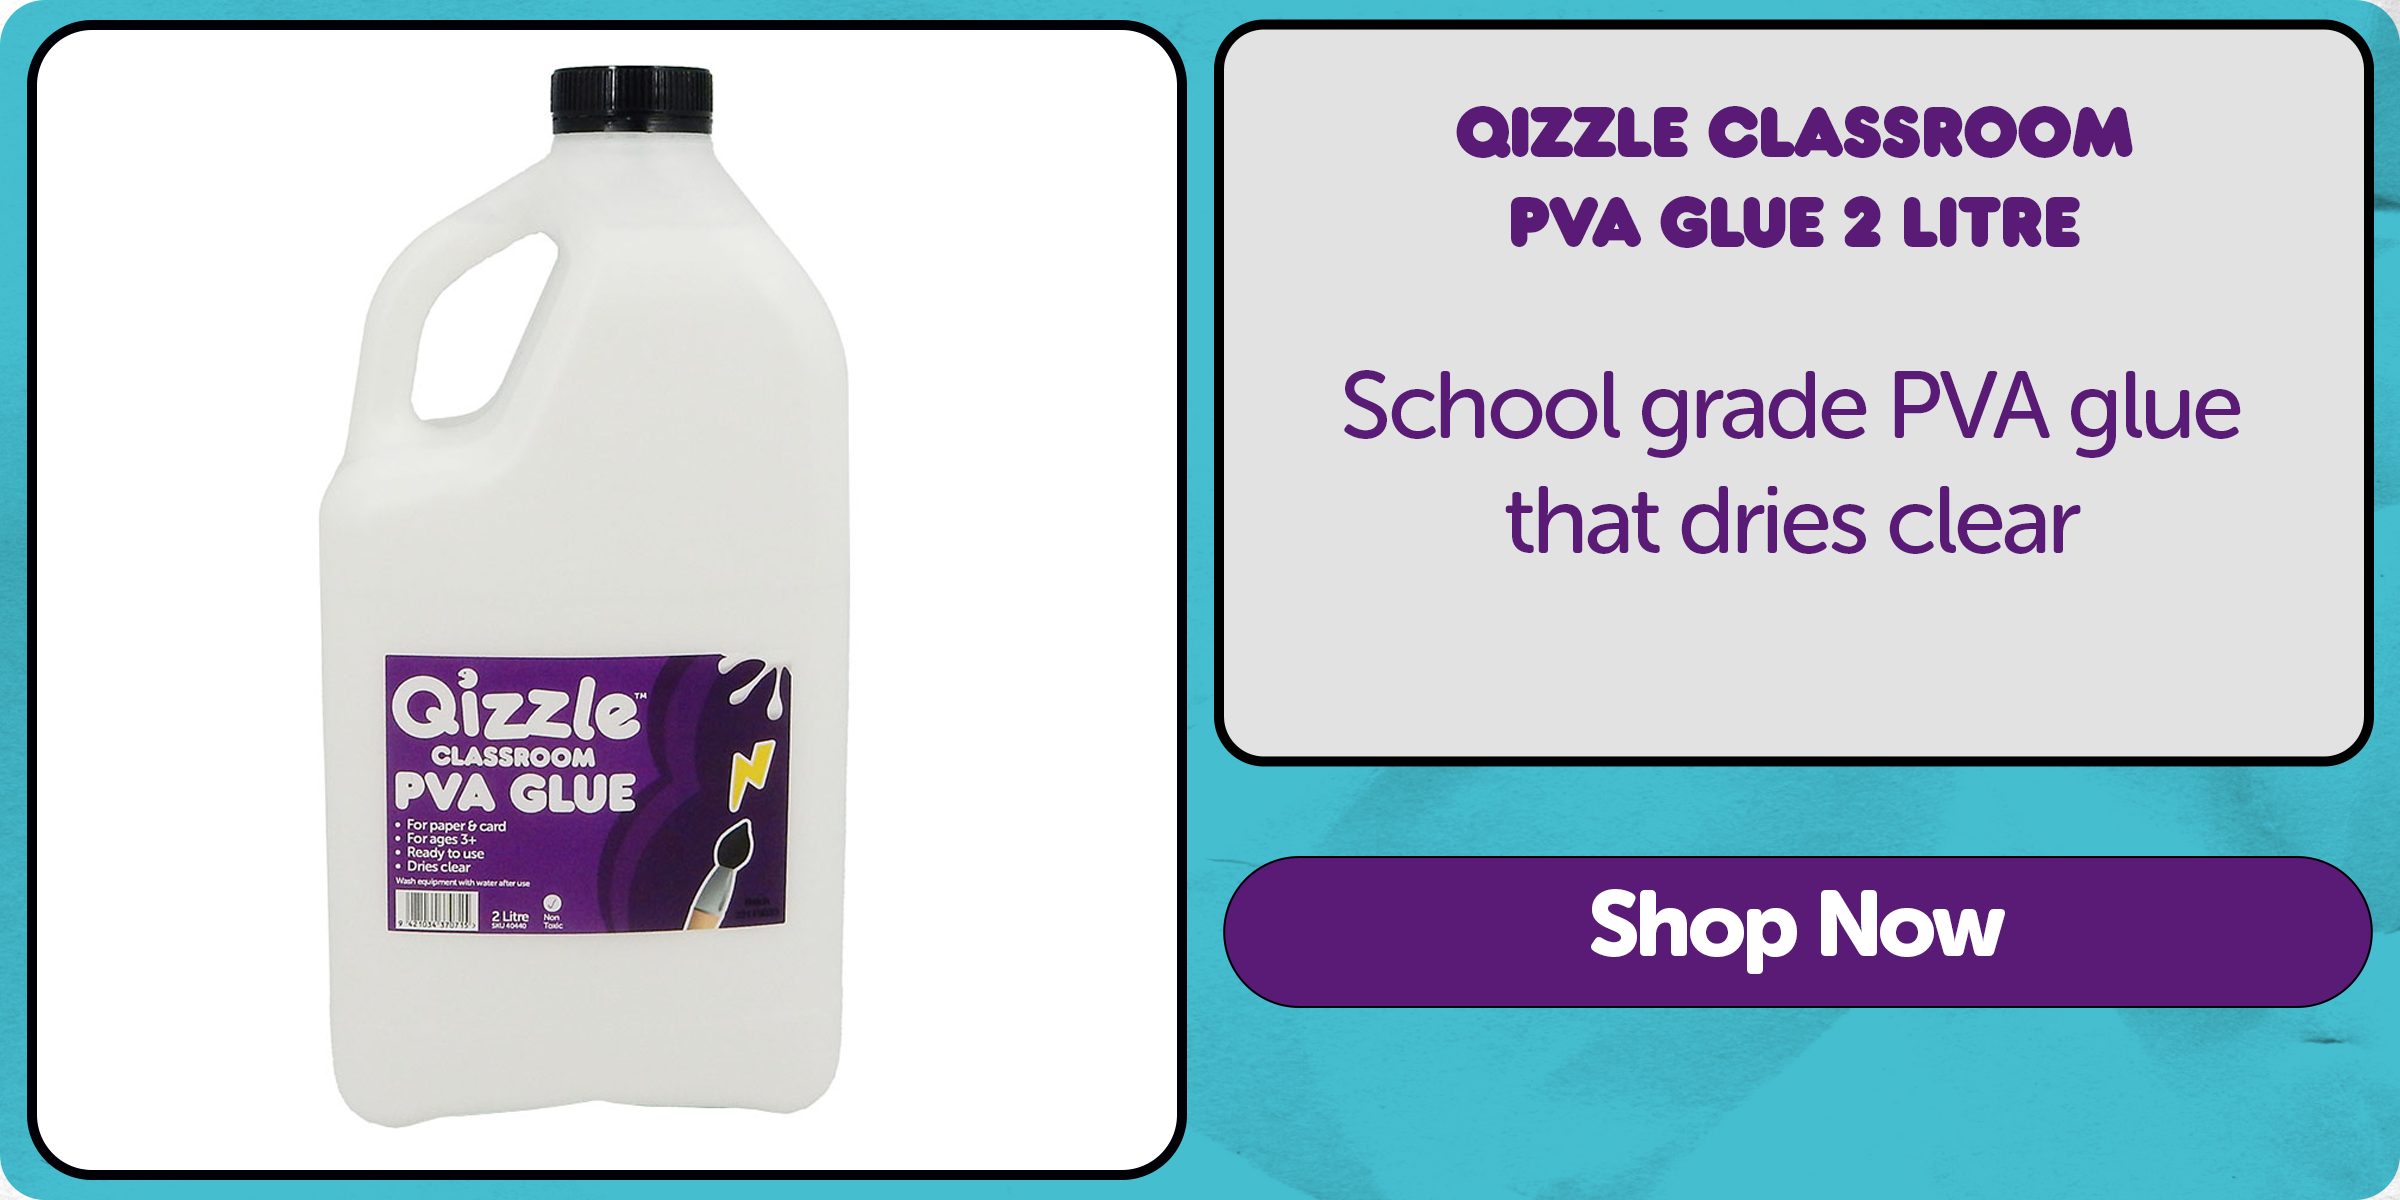 Learn what other schools are buying: These art supplies are the most  popular among Schools and ECE this November. - Qizzle